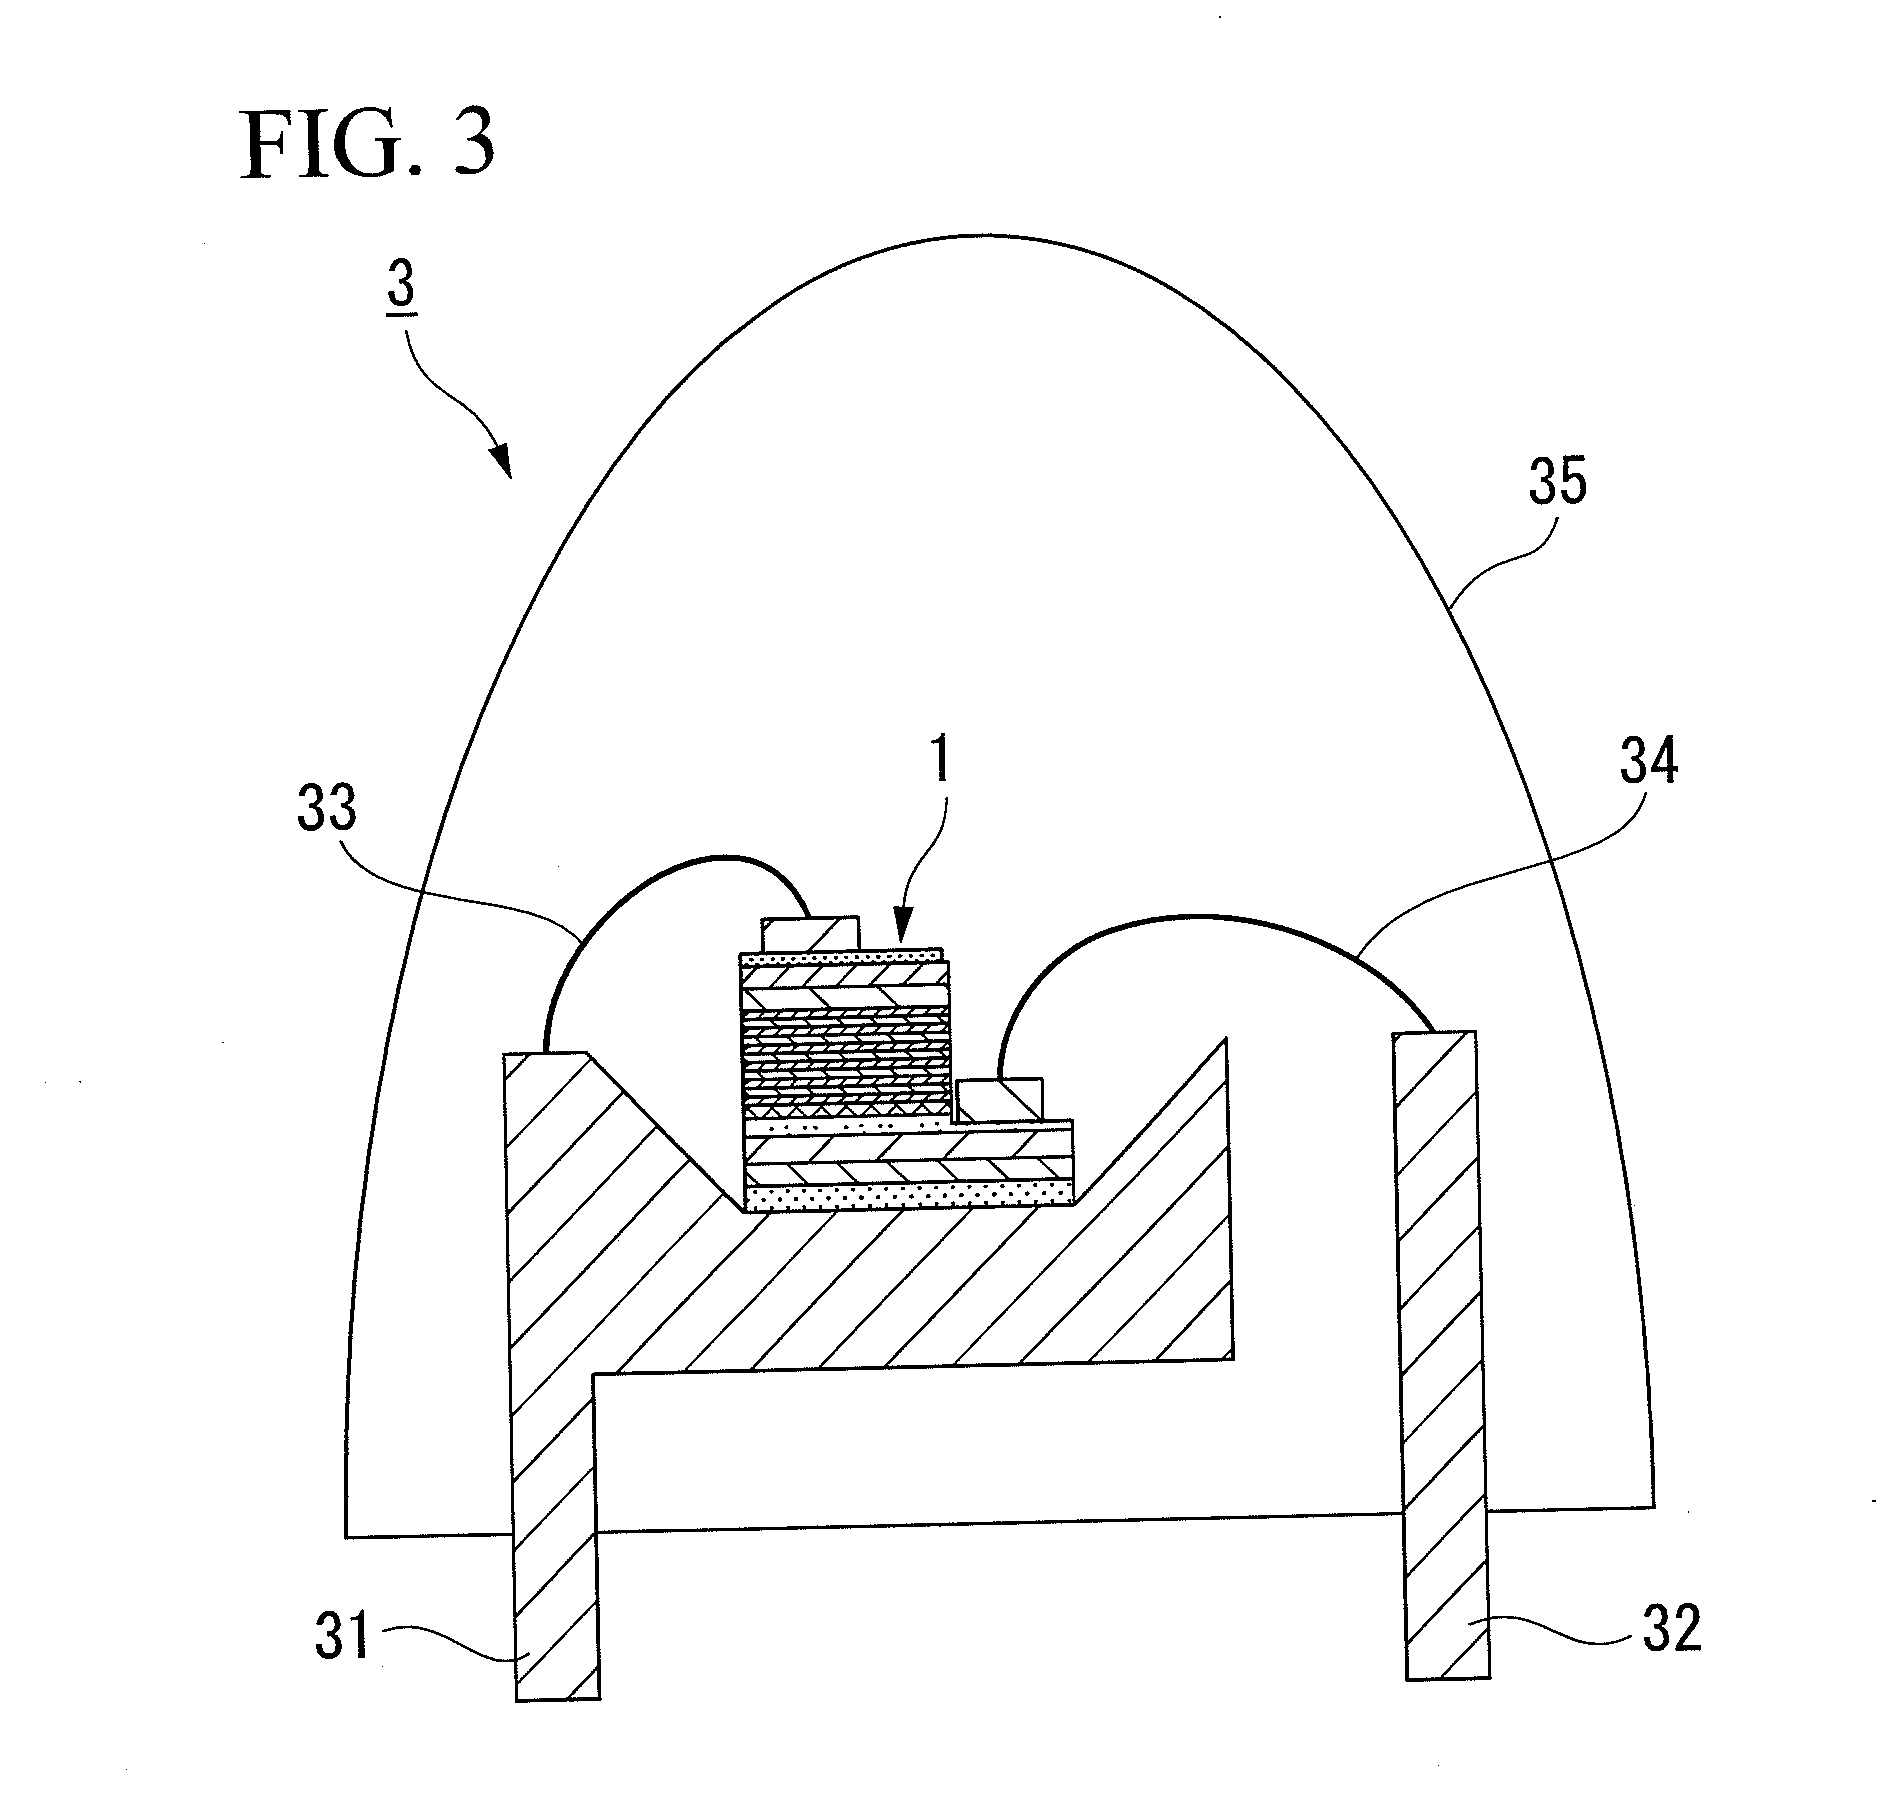 Group-iii nitride semiconductor light-emitting device, method for manufacturing the same, and lamp